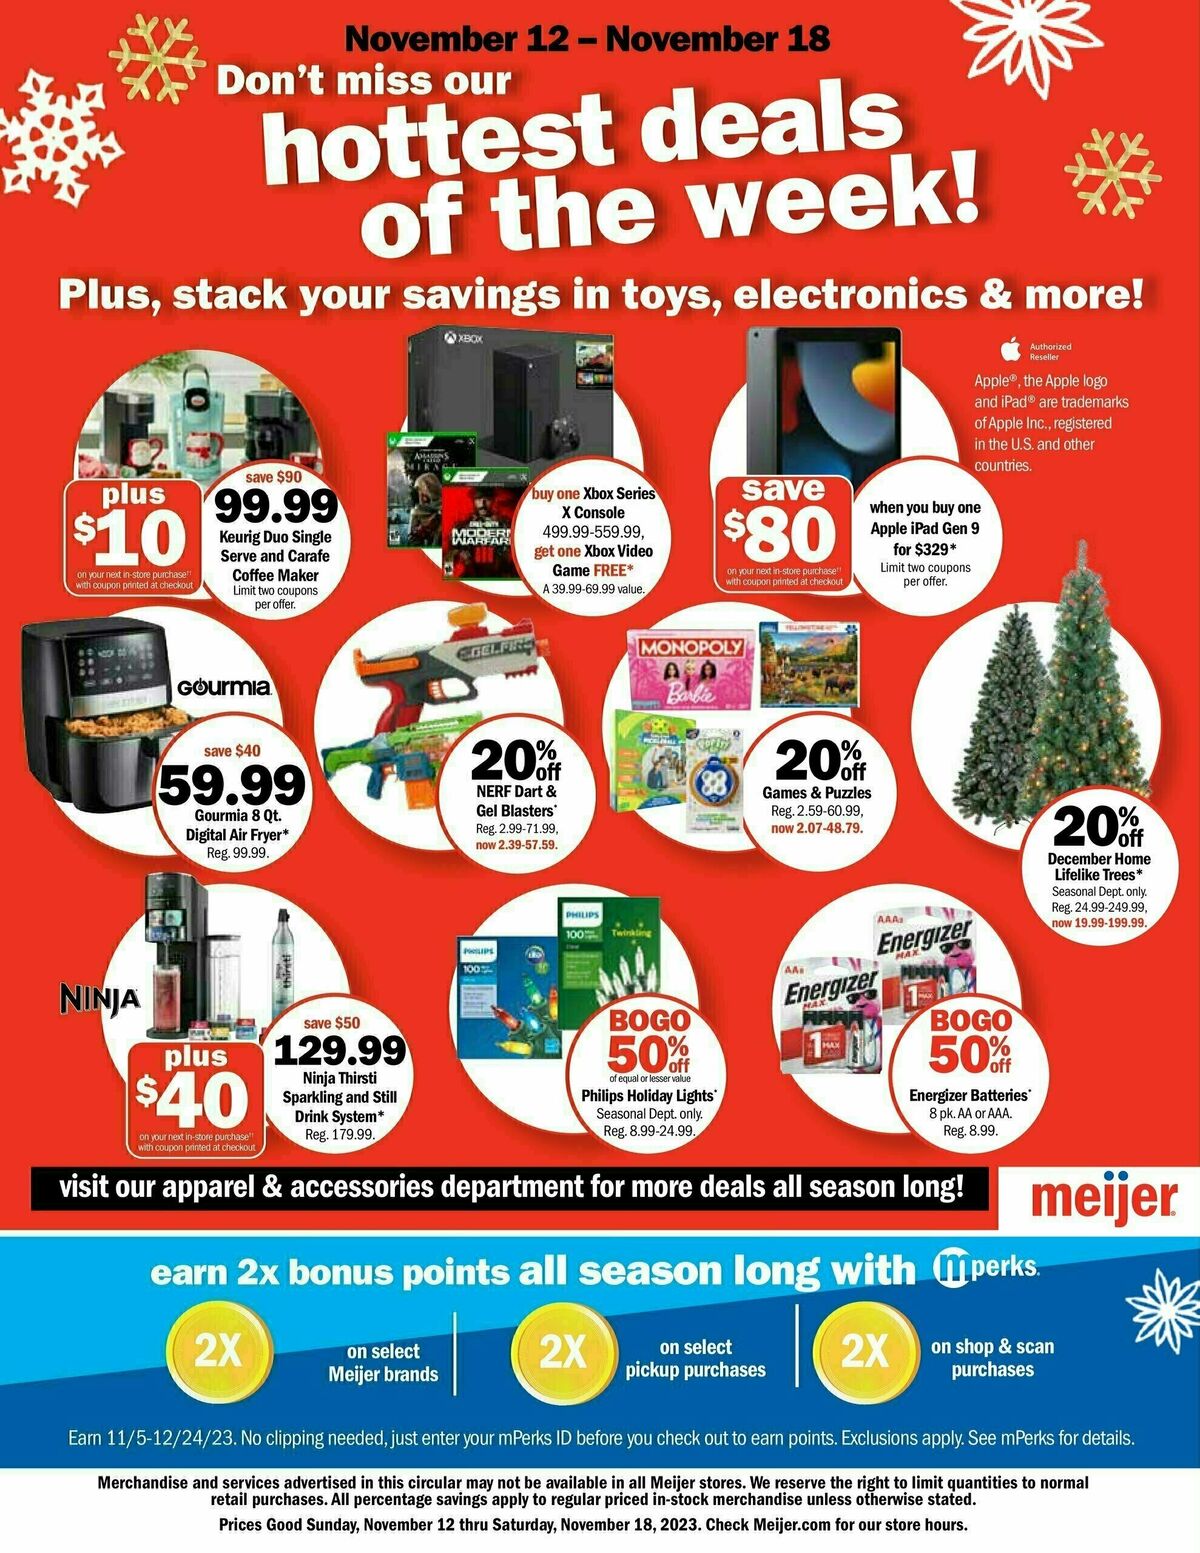 Meijer Top 10 Deals Ad Weekly Ad from November 12